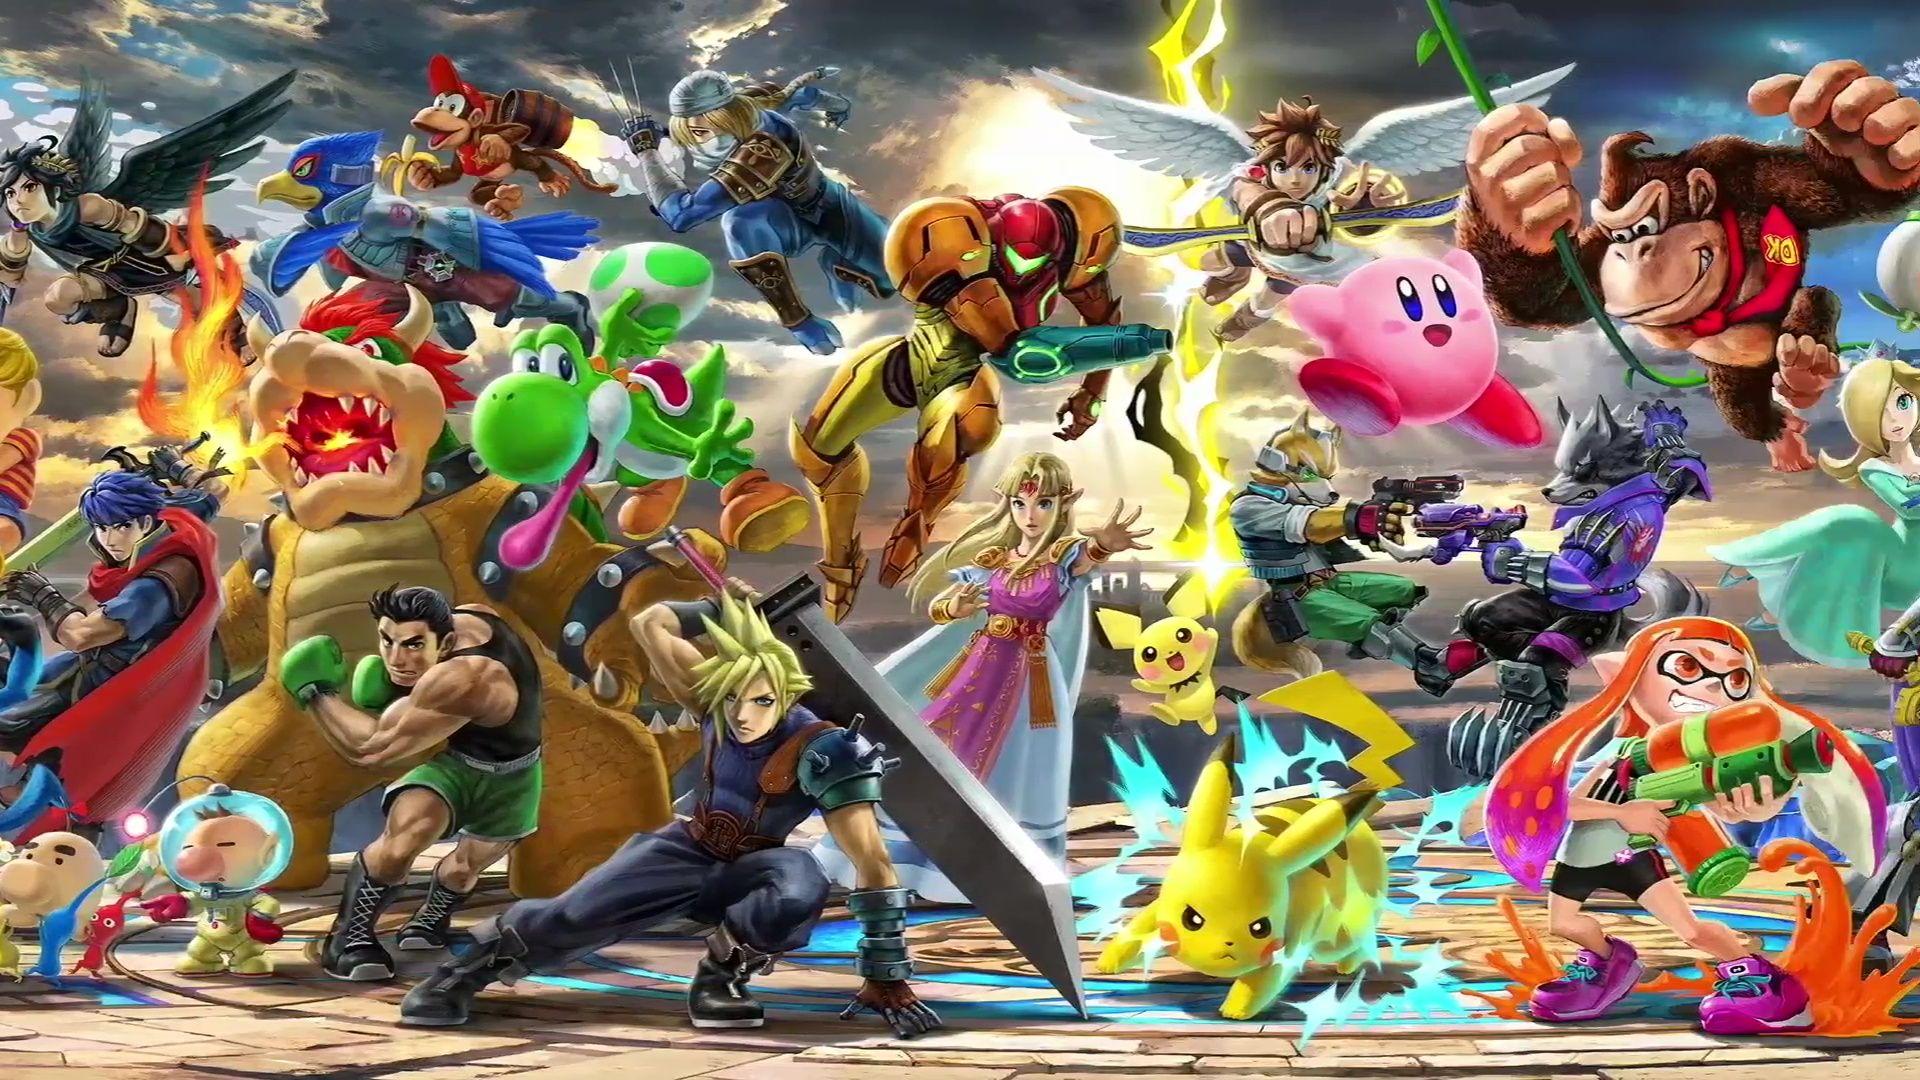 Super Smash Bros. Ultimate will include every previous fighter